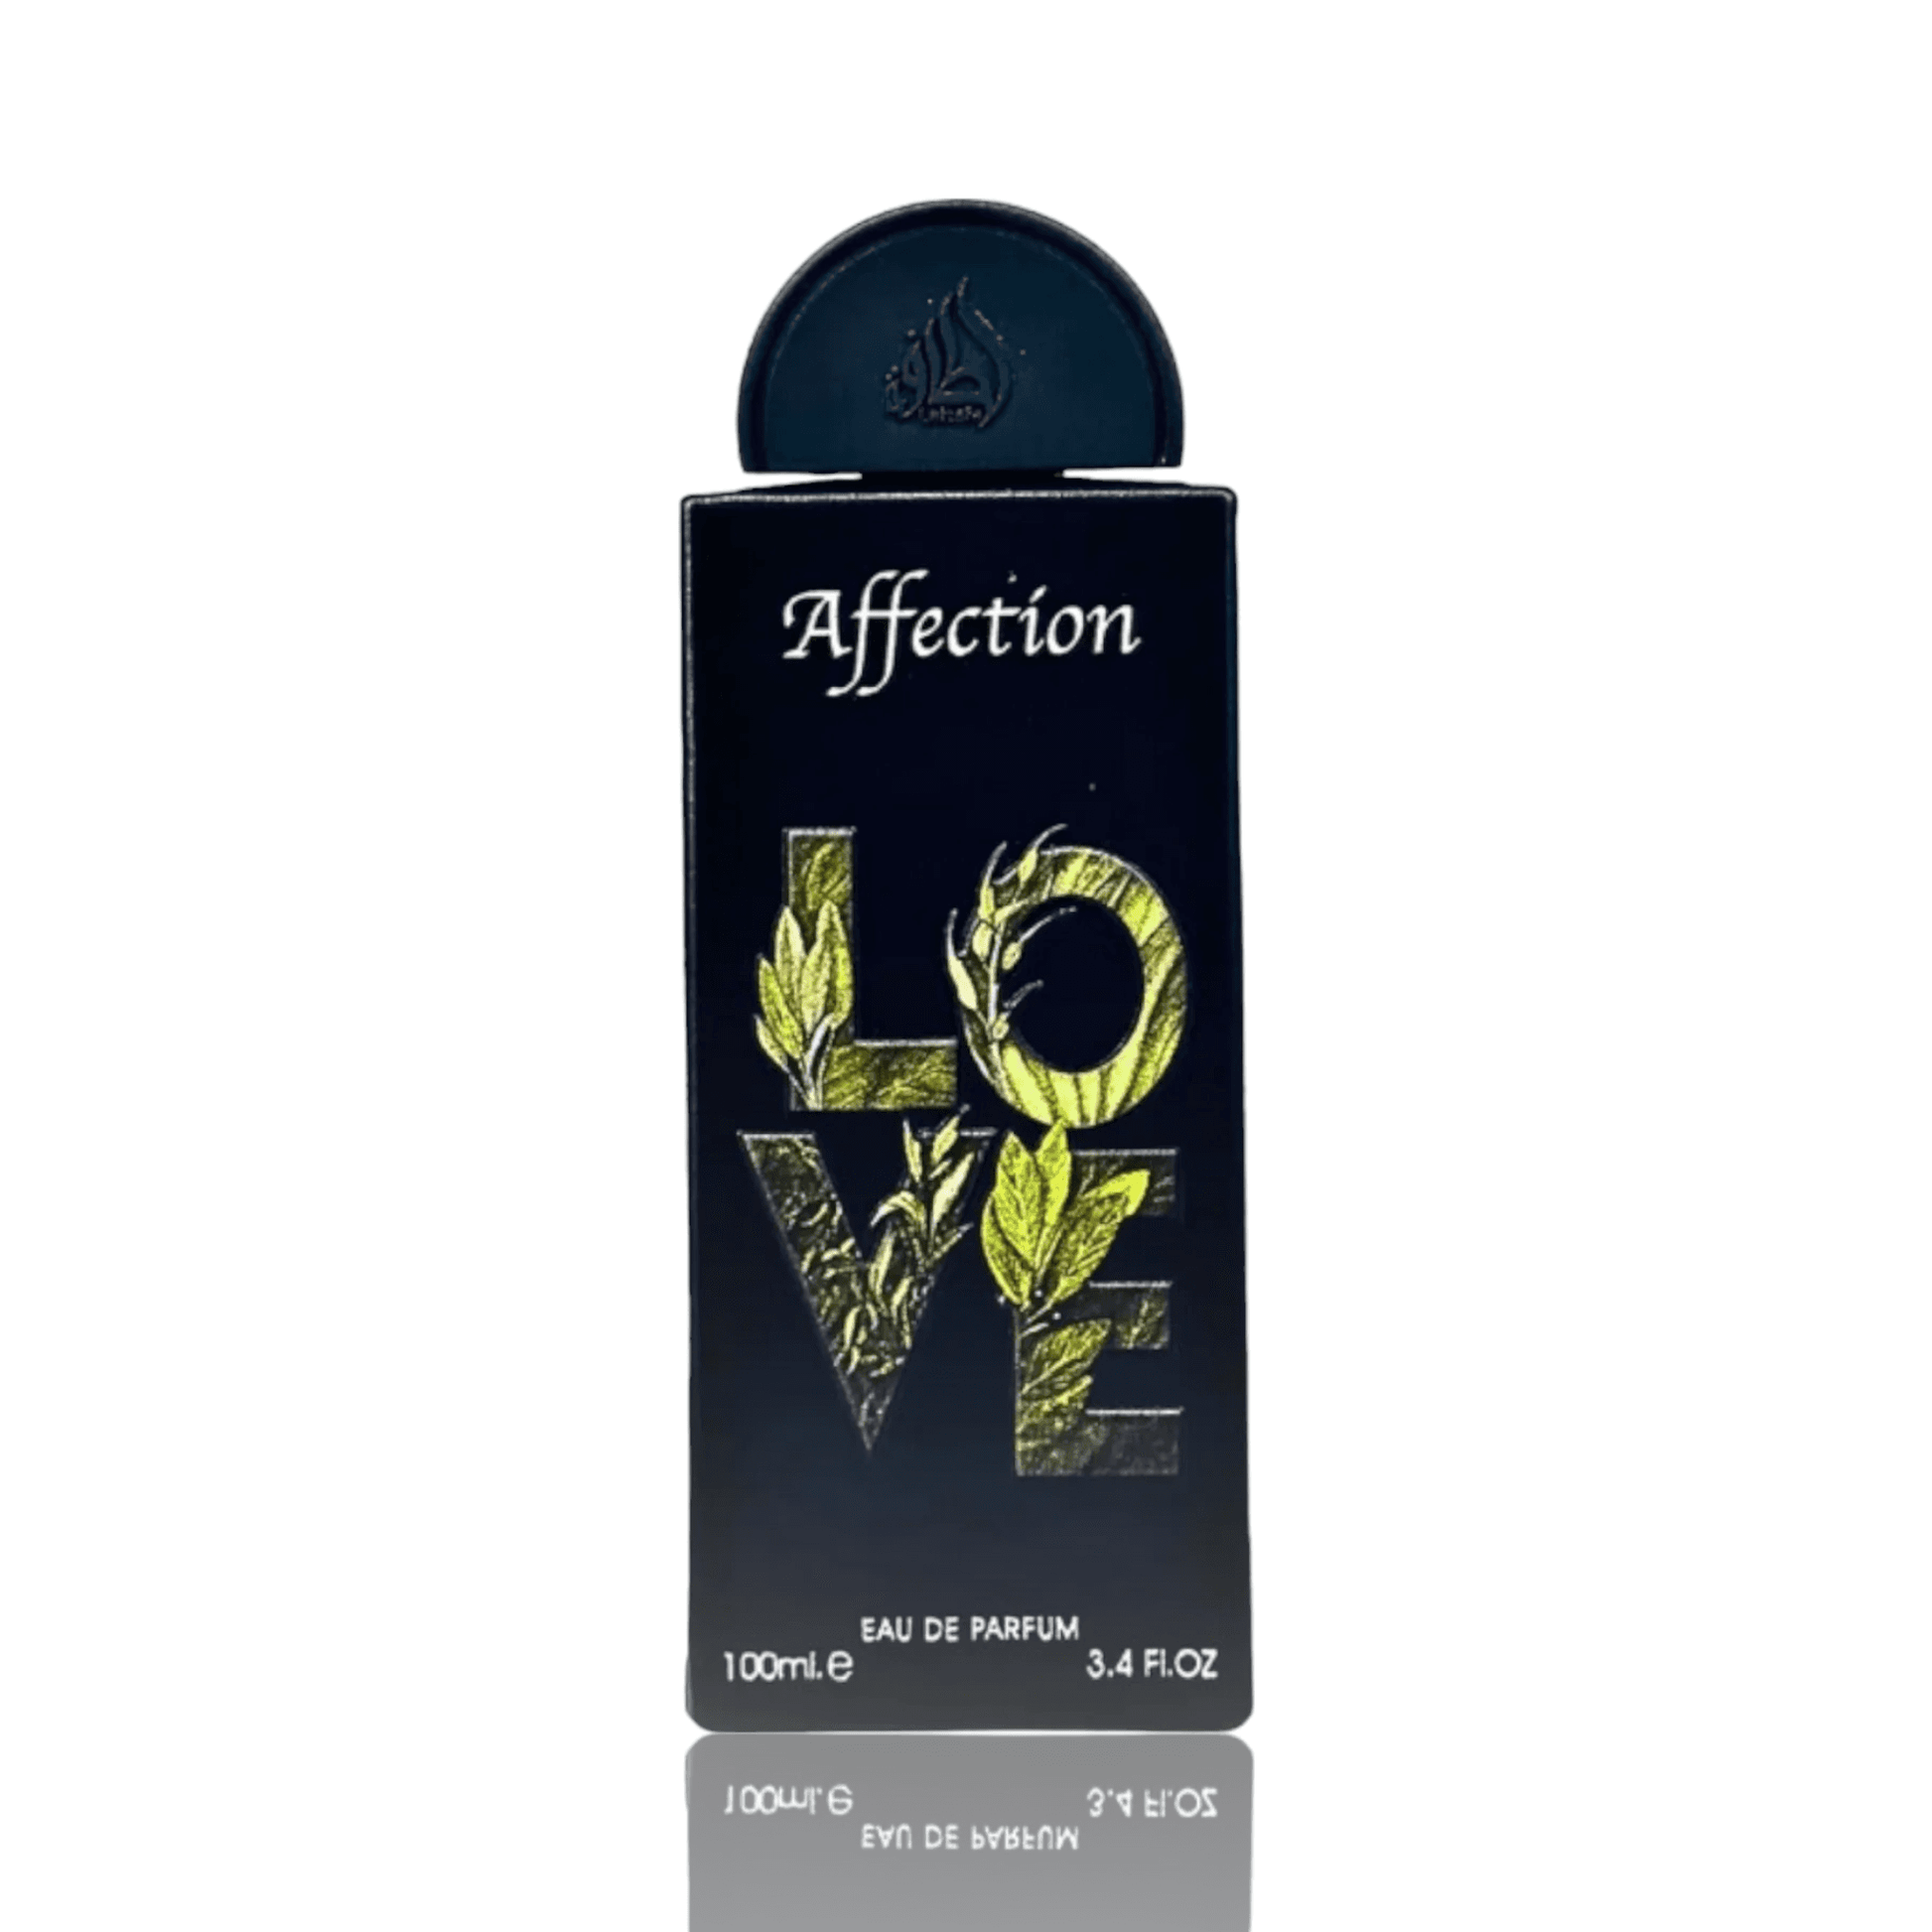 Close-up of Affection Perfume bottle, highlighting its luxurious design and the unique combination of pistachio, hazelnut, and floral scents.